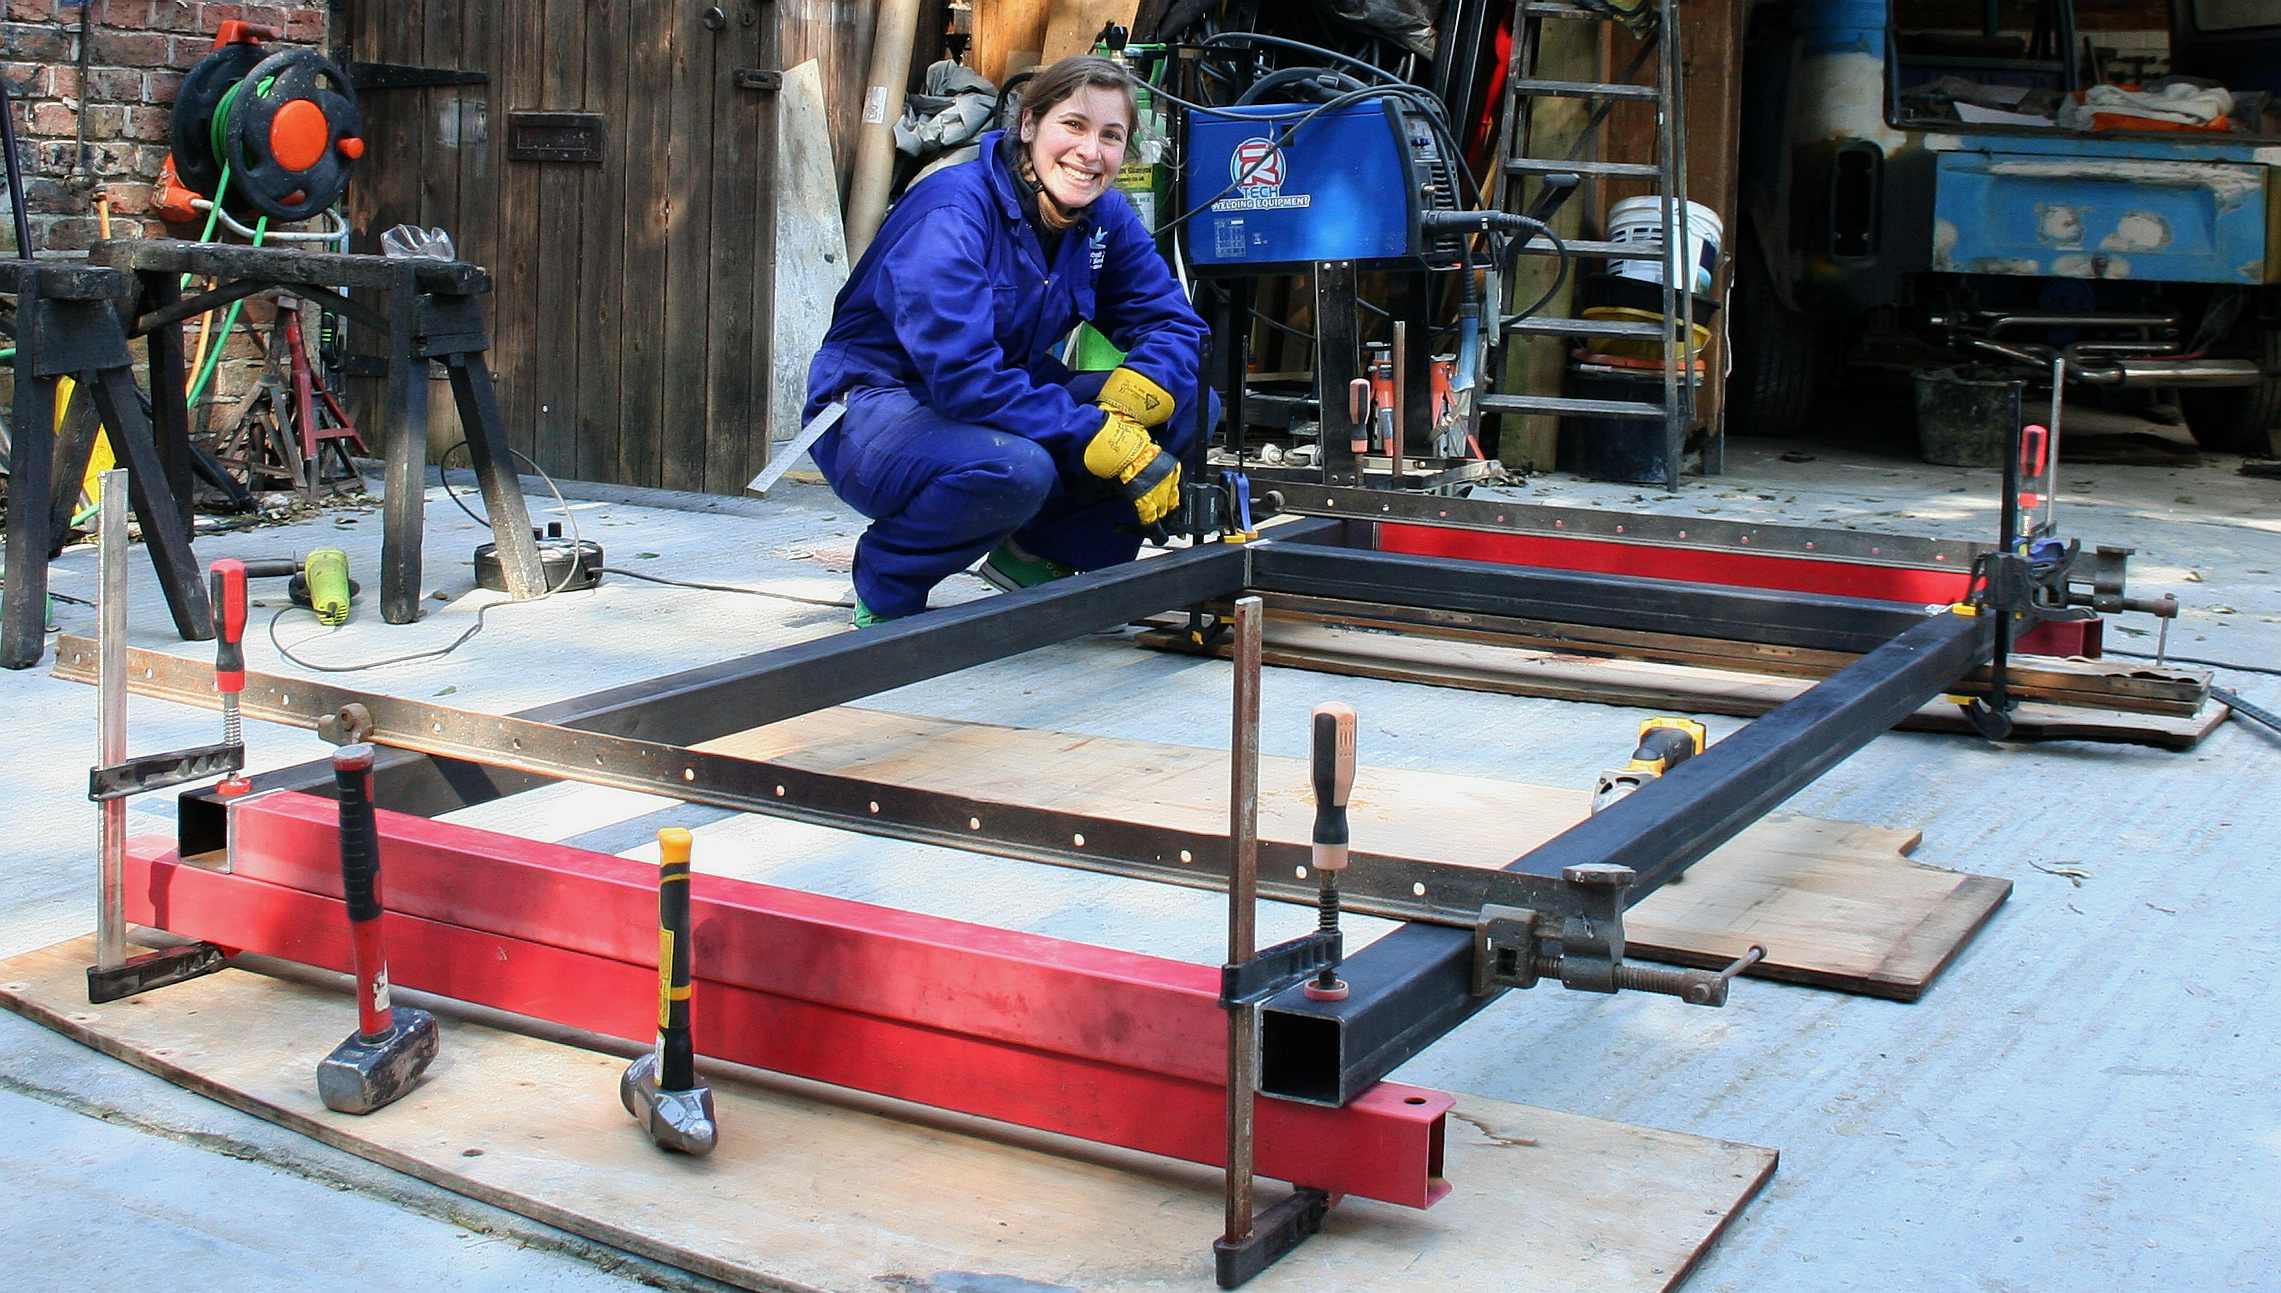 Lolita helping to make a steel frame for a wind turbine project